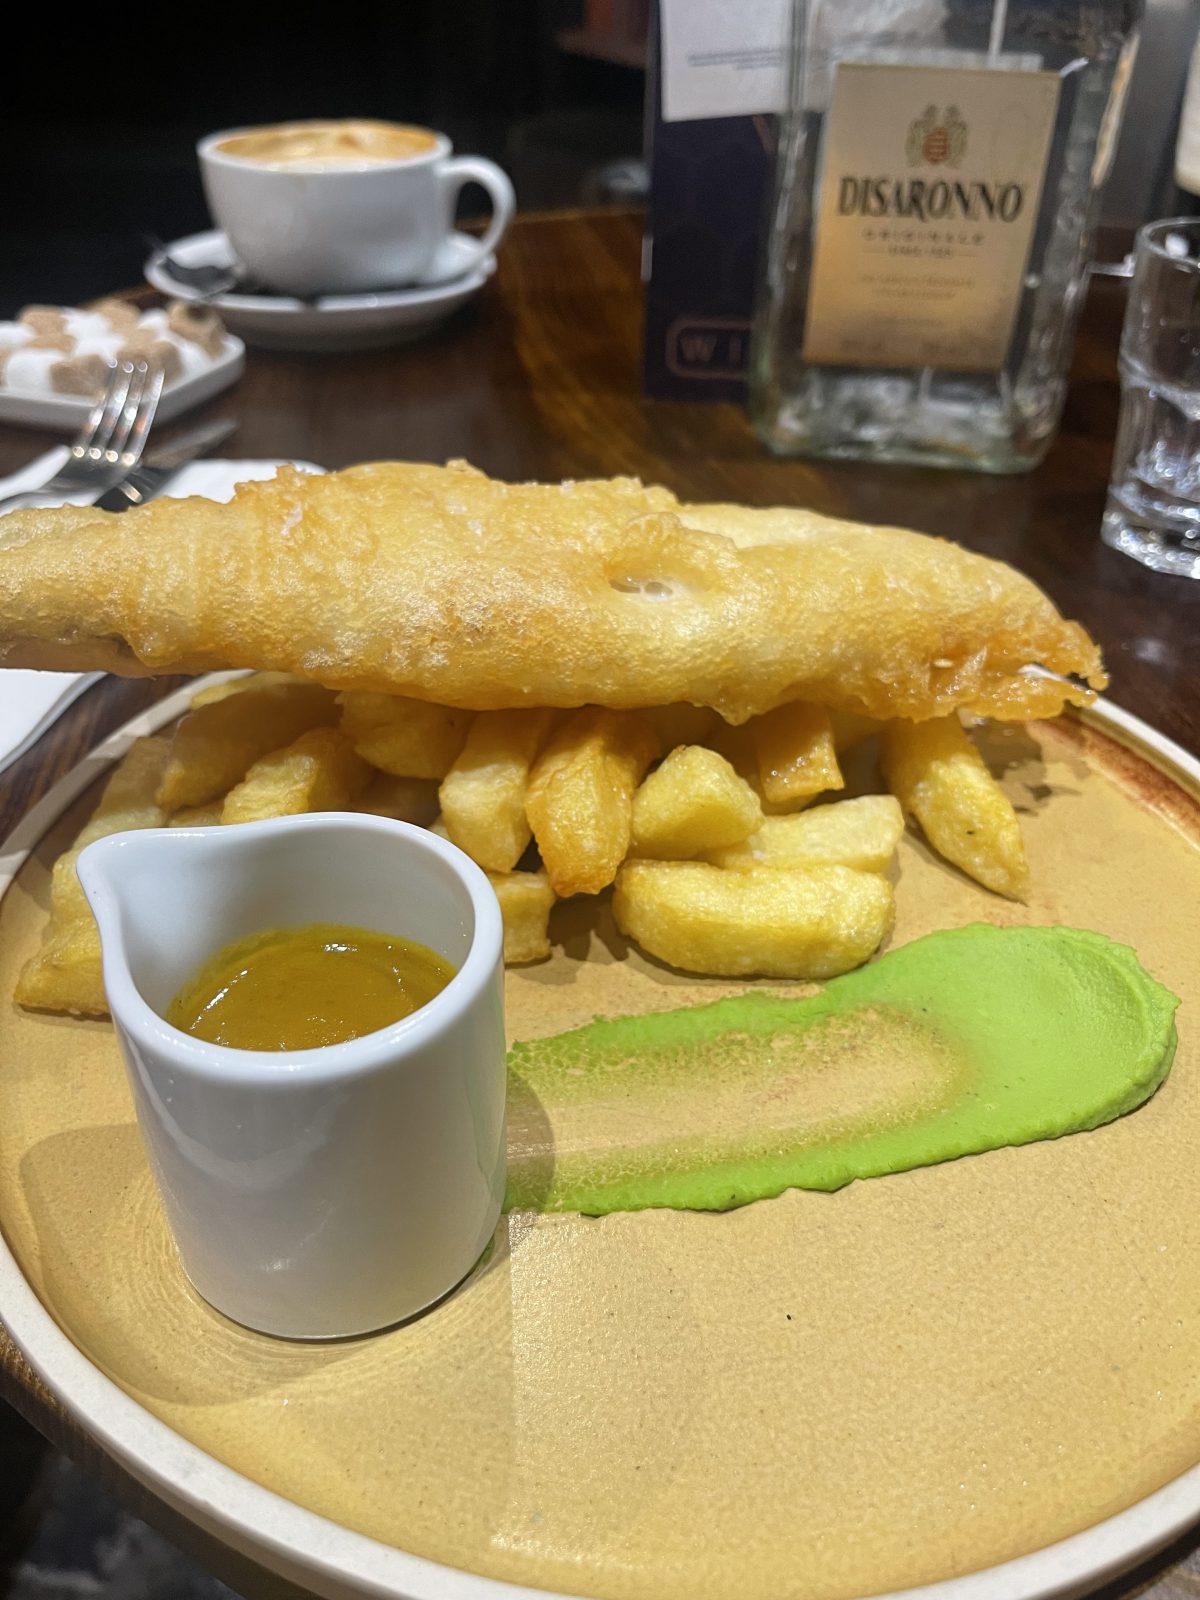 fish and chips on a plate.